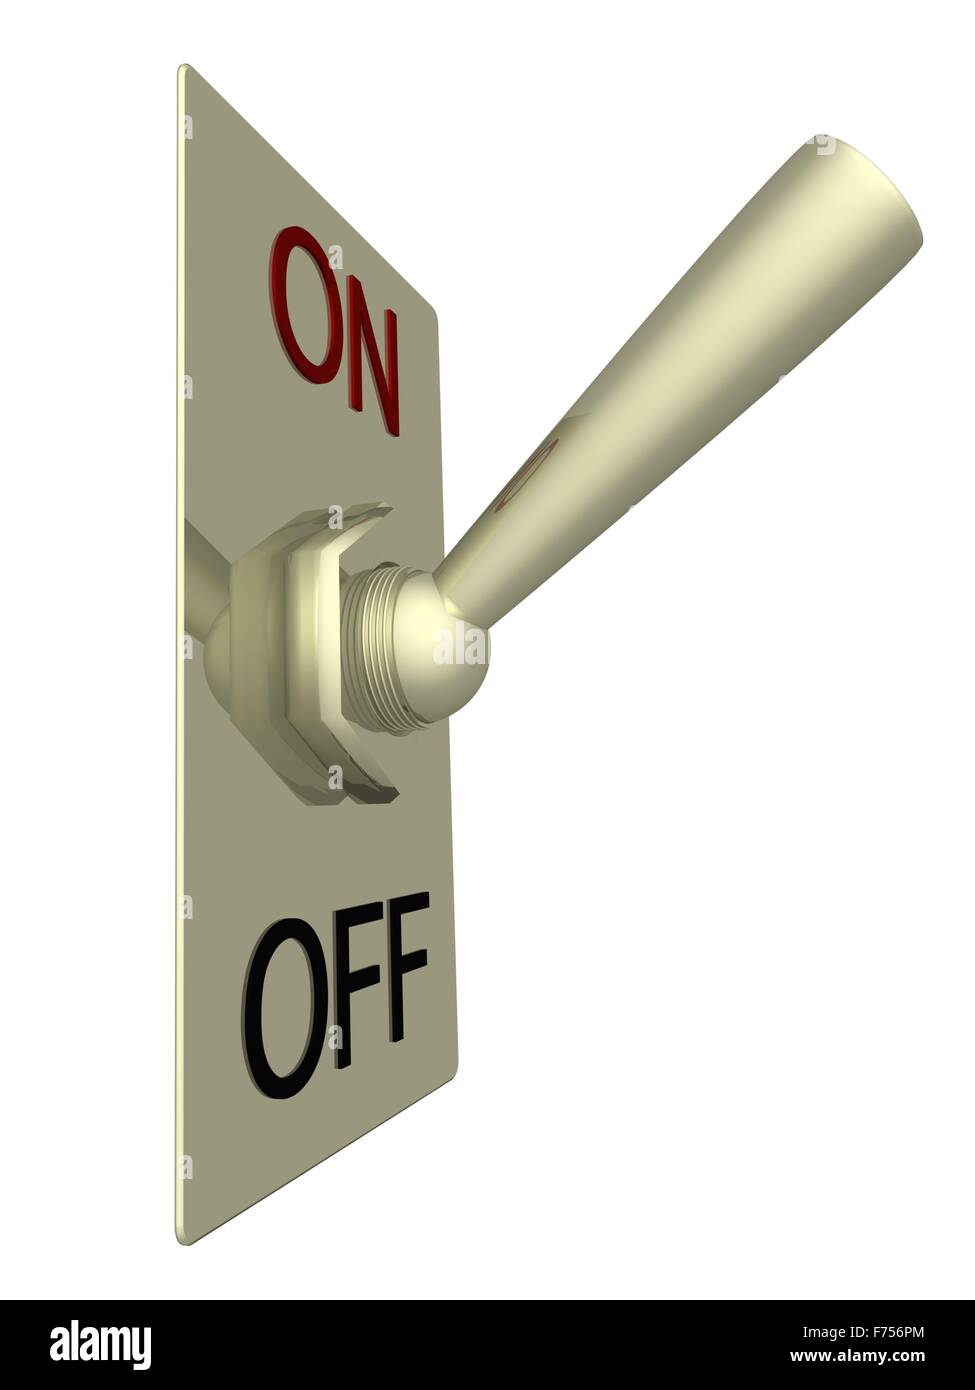 The electric switch on a white background. 3D image. Stock Photo